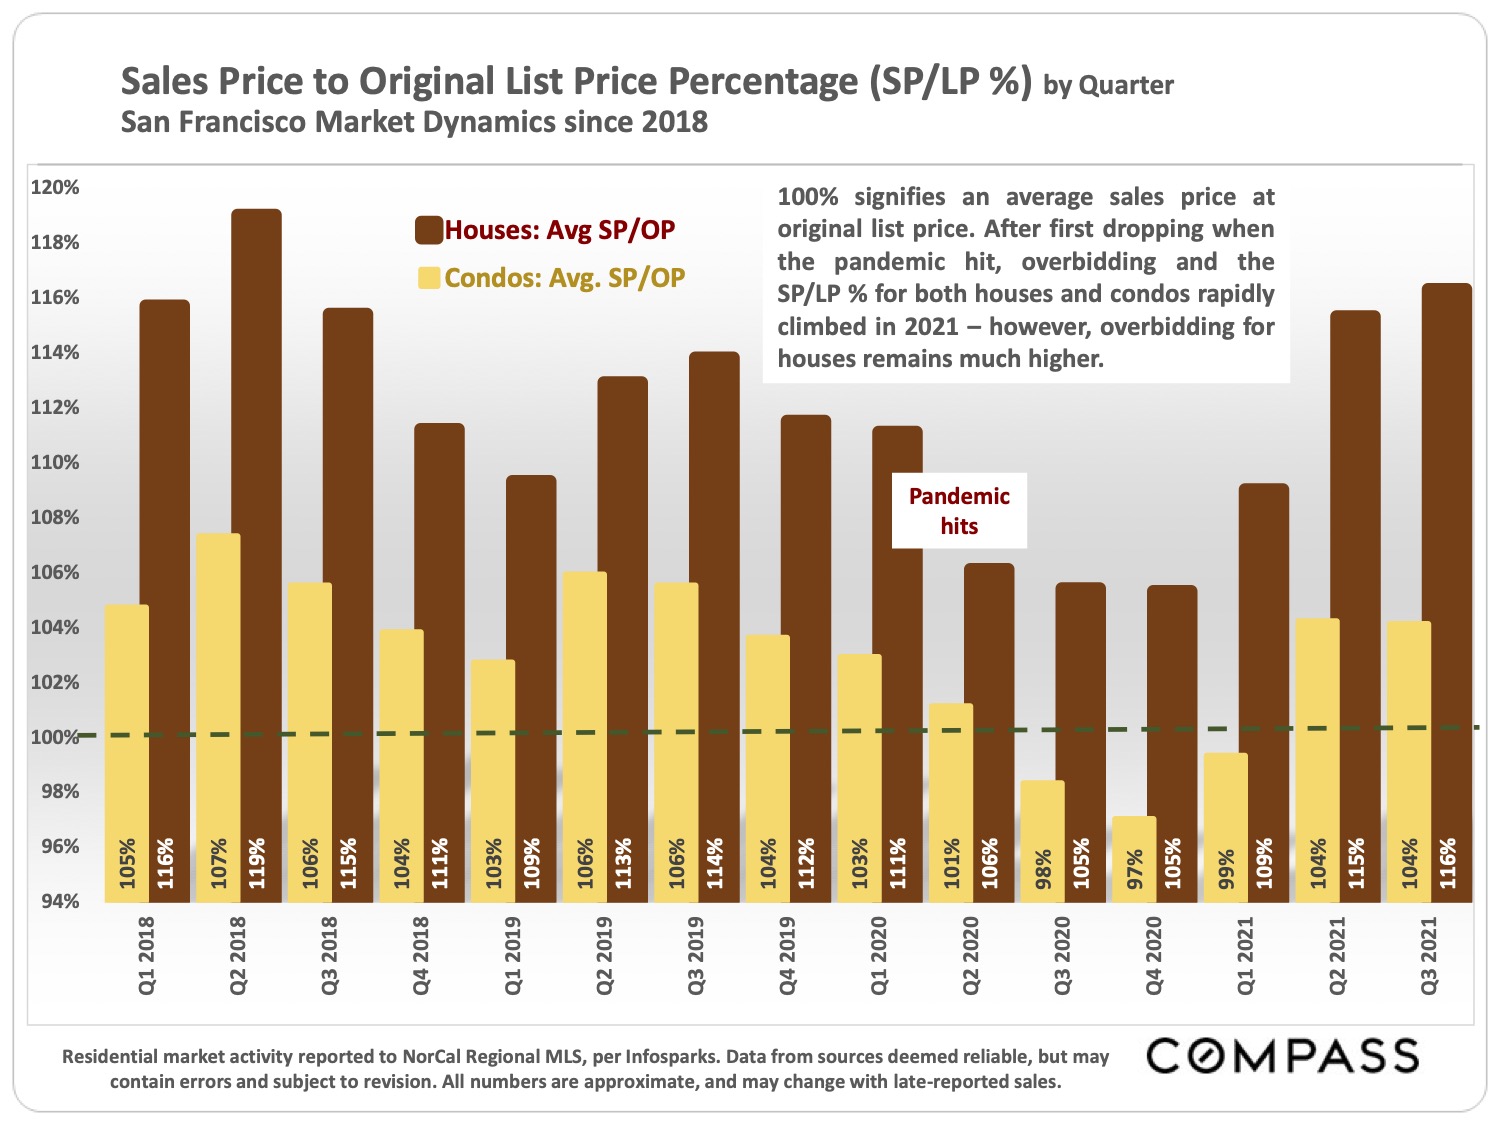 Image showing the Sales Price to Original List Price Percentage (SP:LP %) by quarter San Francisco Market Dynamics since 2018 as of October 2021